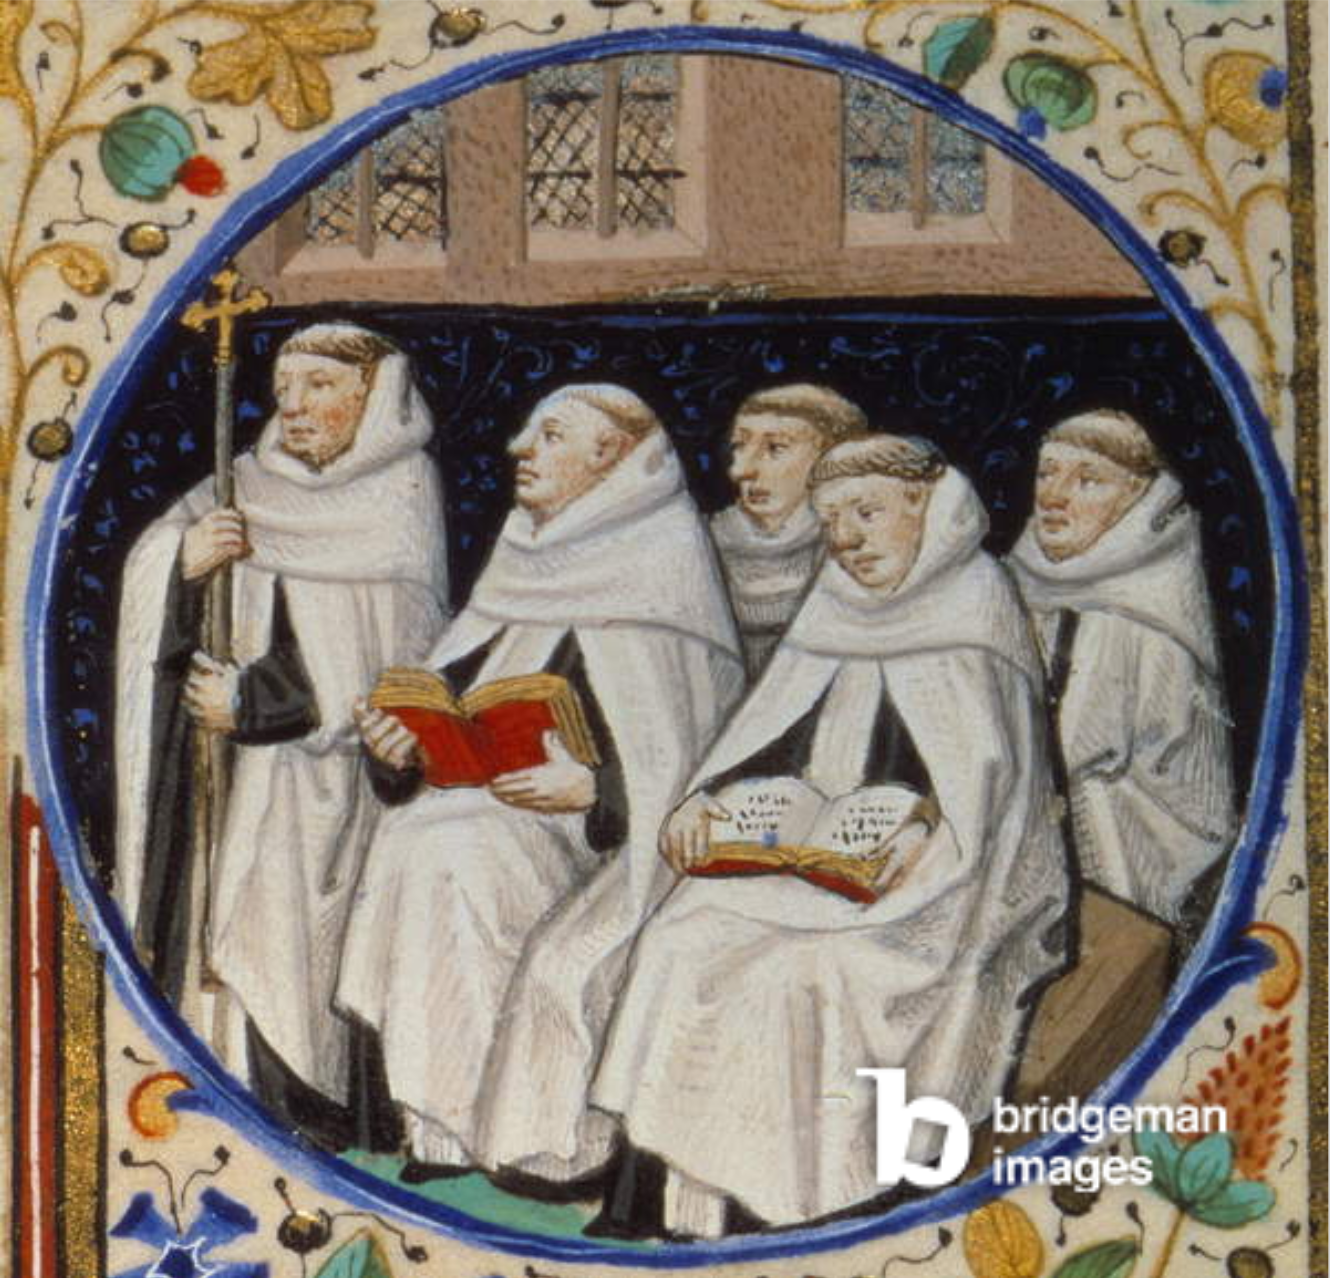 Scene of monastic life. Detail depicting monks of the Order of Carmen. Miniature from the "Book of hours according to the usage of Paris" illuminated by the workshop of the Master of Bedford. 1450 / National Library, Paris, France / Photo © Photo Josse / Bridgeman Images